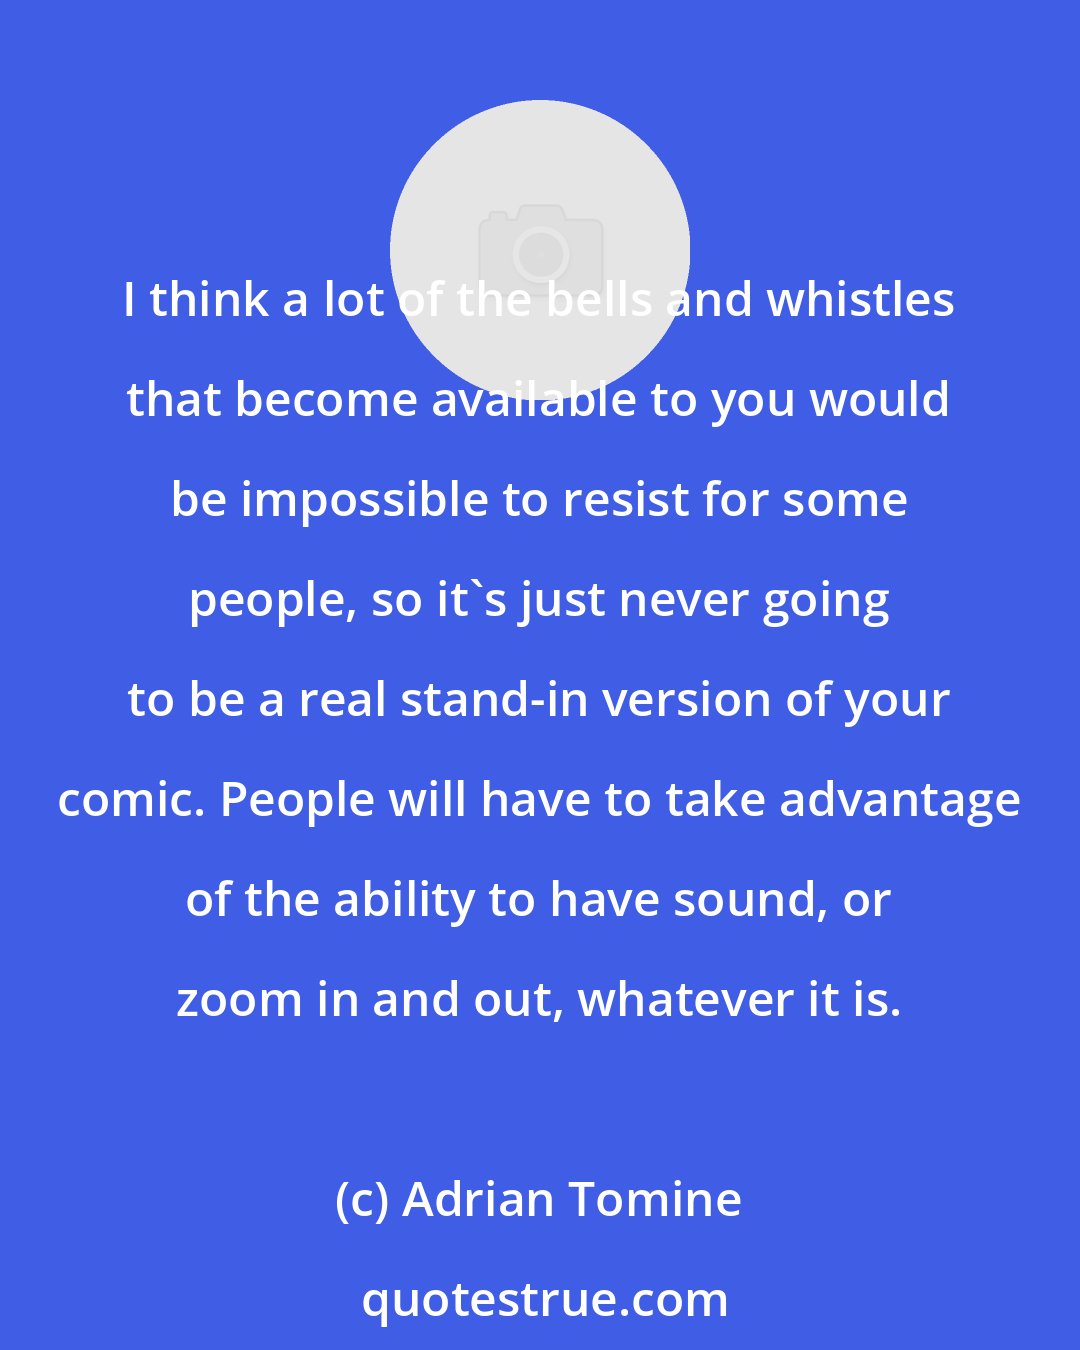 Adrian Tomine: I think a lot of the bells and whistles that become available to you would be impossible to resist for some people, so it's just never going to be a real stand-in version of your comic. People will have to take advantage of the ability to have sound, or zoom in and out, whatever it is.